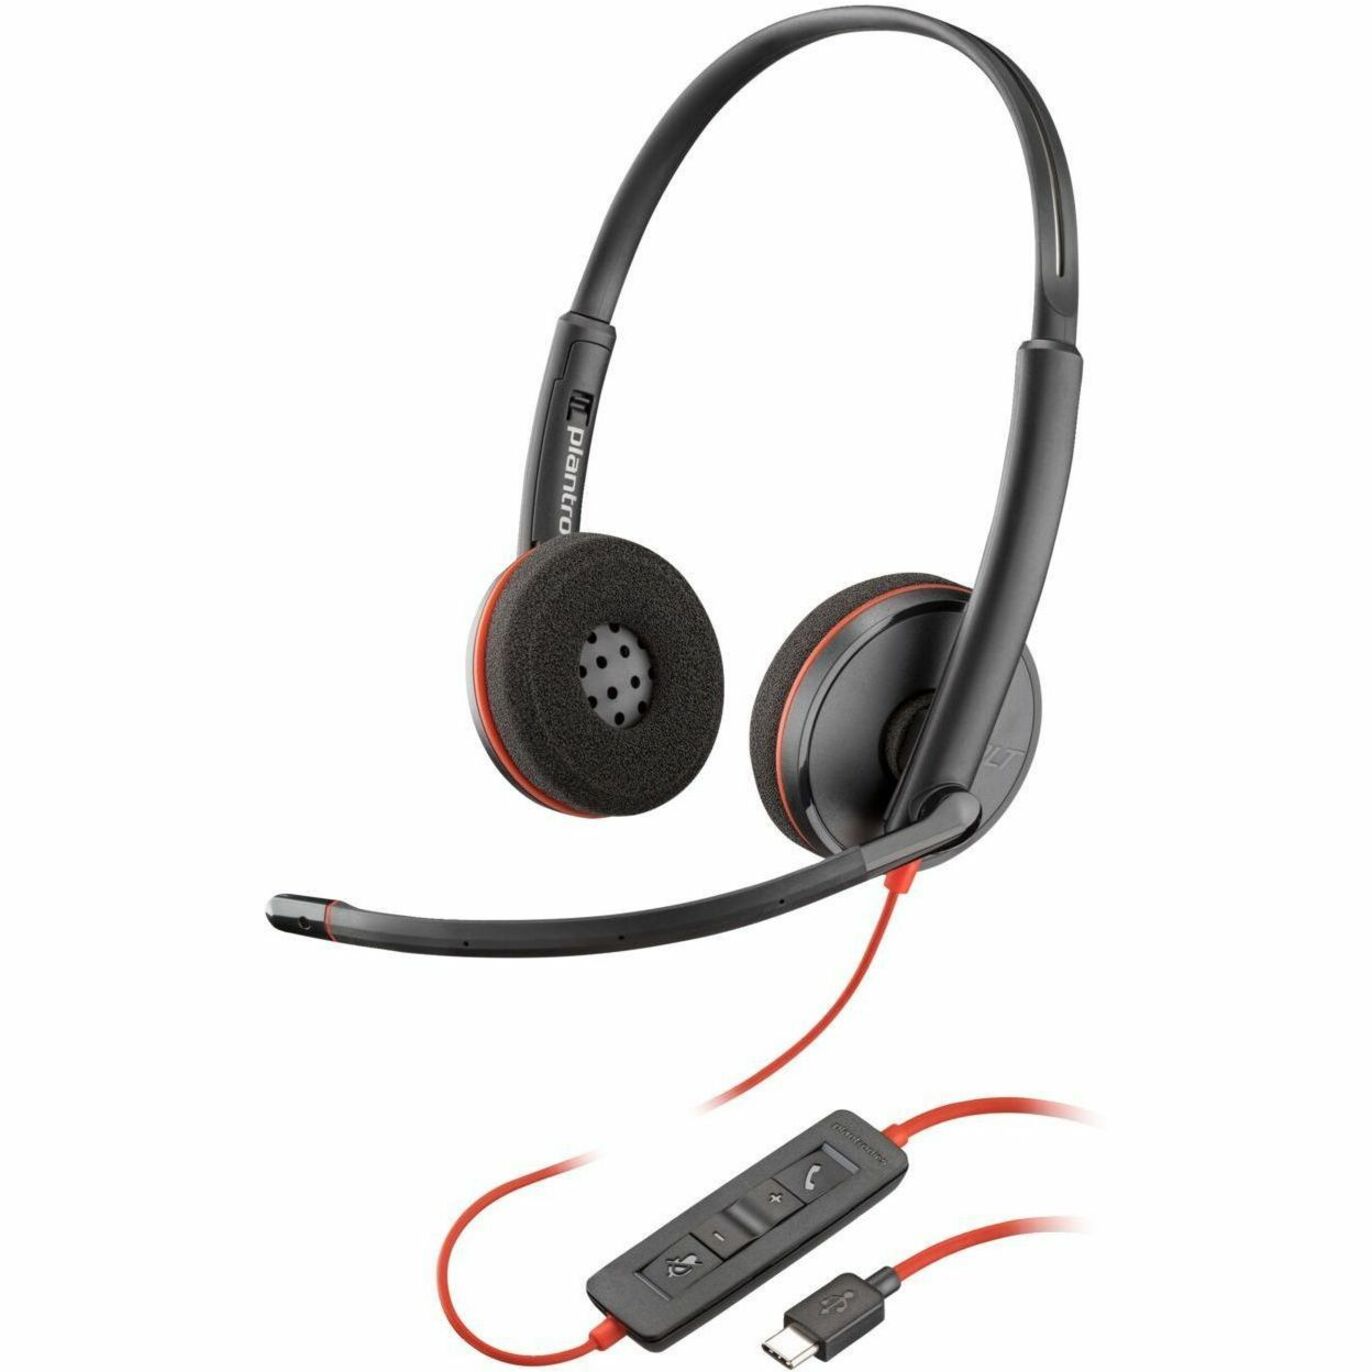 Poly 80S07A6 Blackwire C3220 Headset, Binaural Over-the-ear Over-the-head, USB Type C, Noise Cancelling